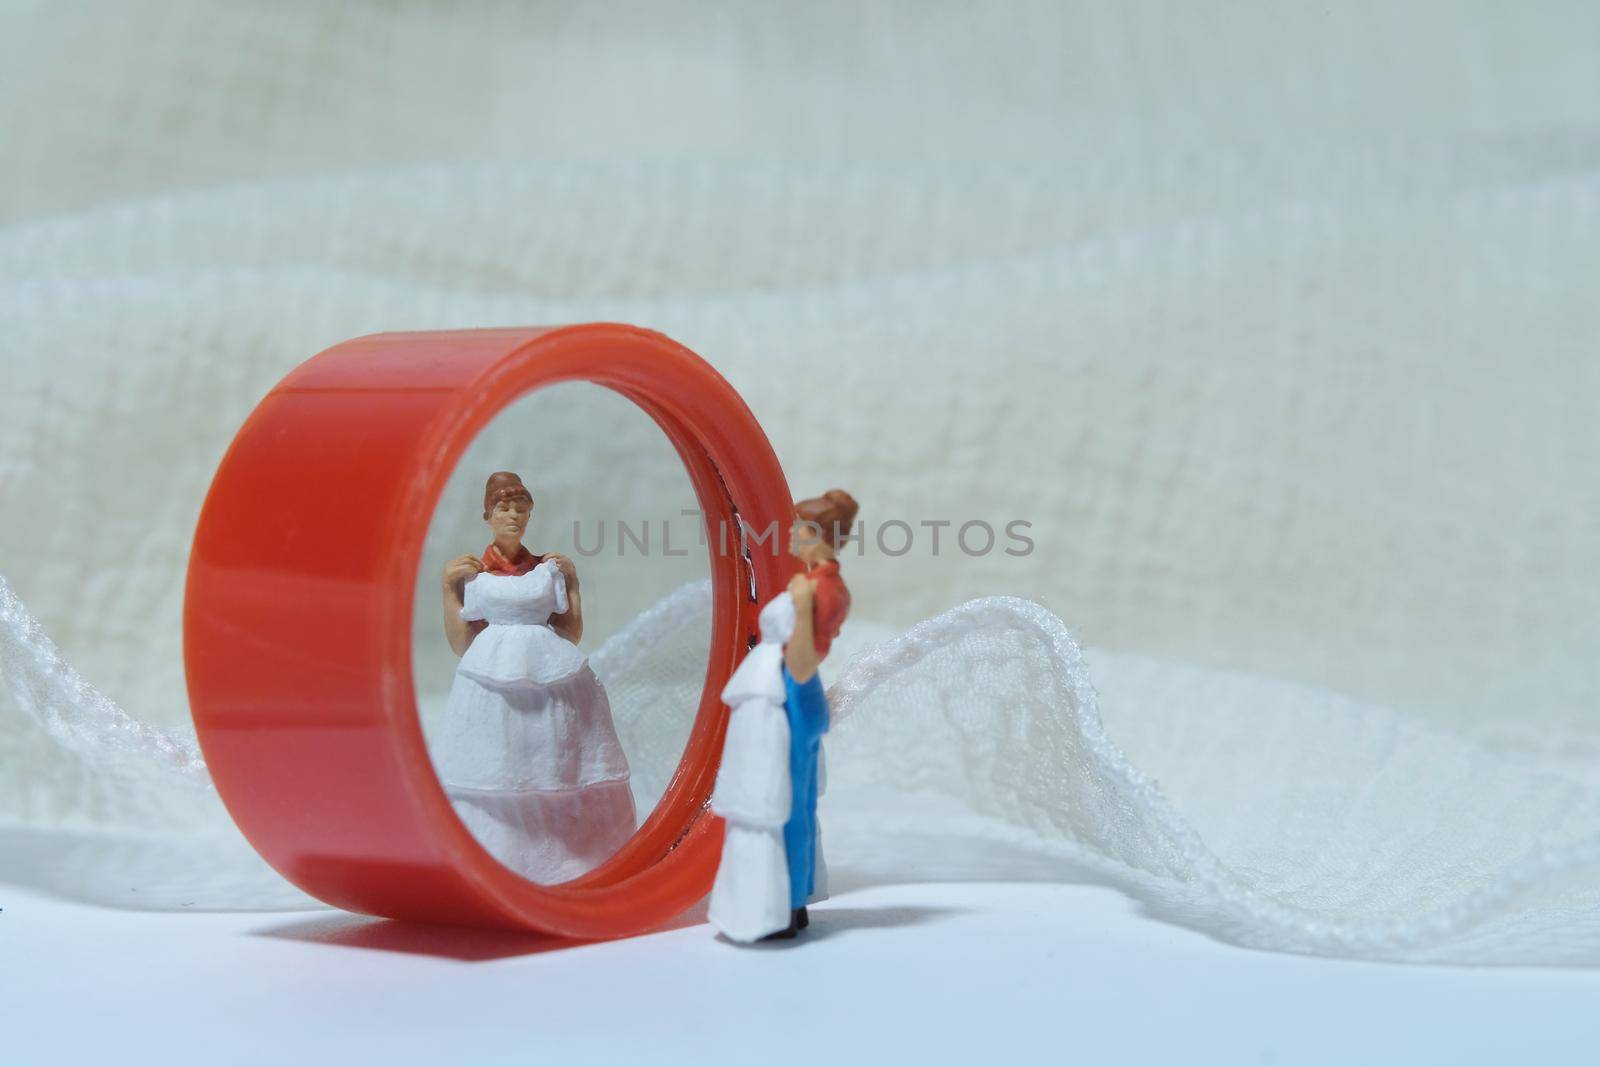 Women miniature people stand in front of mirror trying wedding dress. Image photo